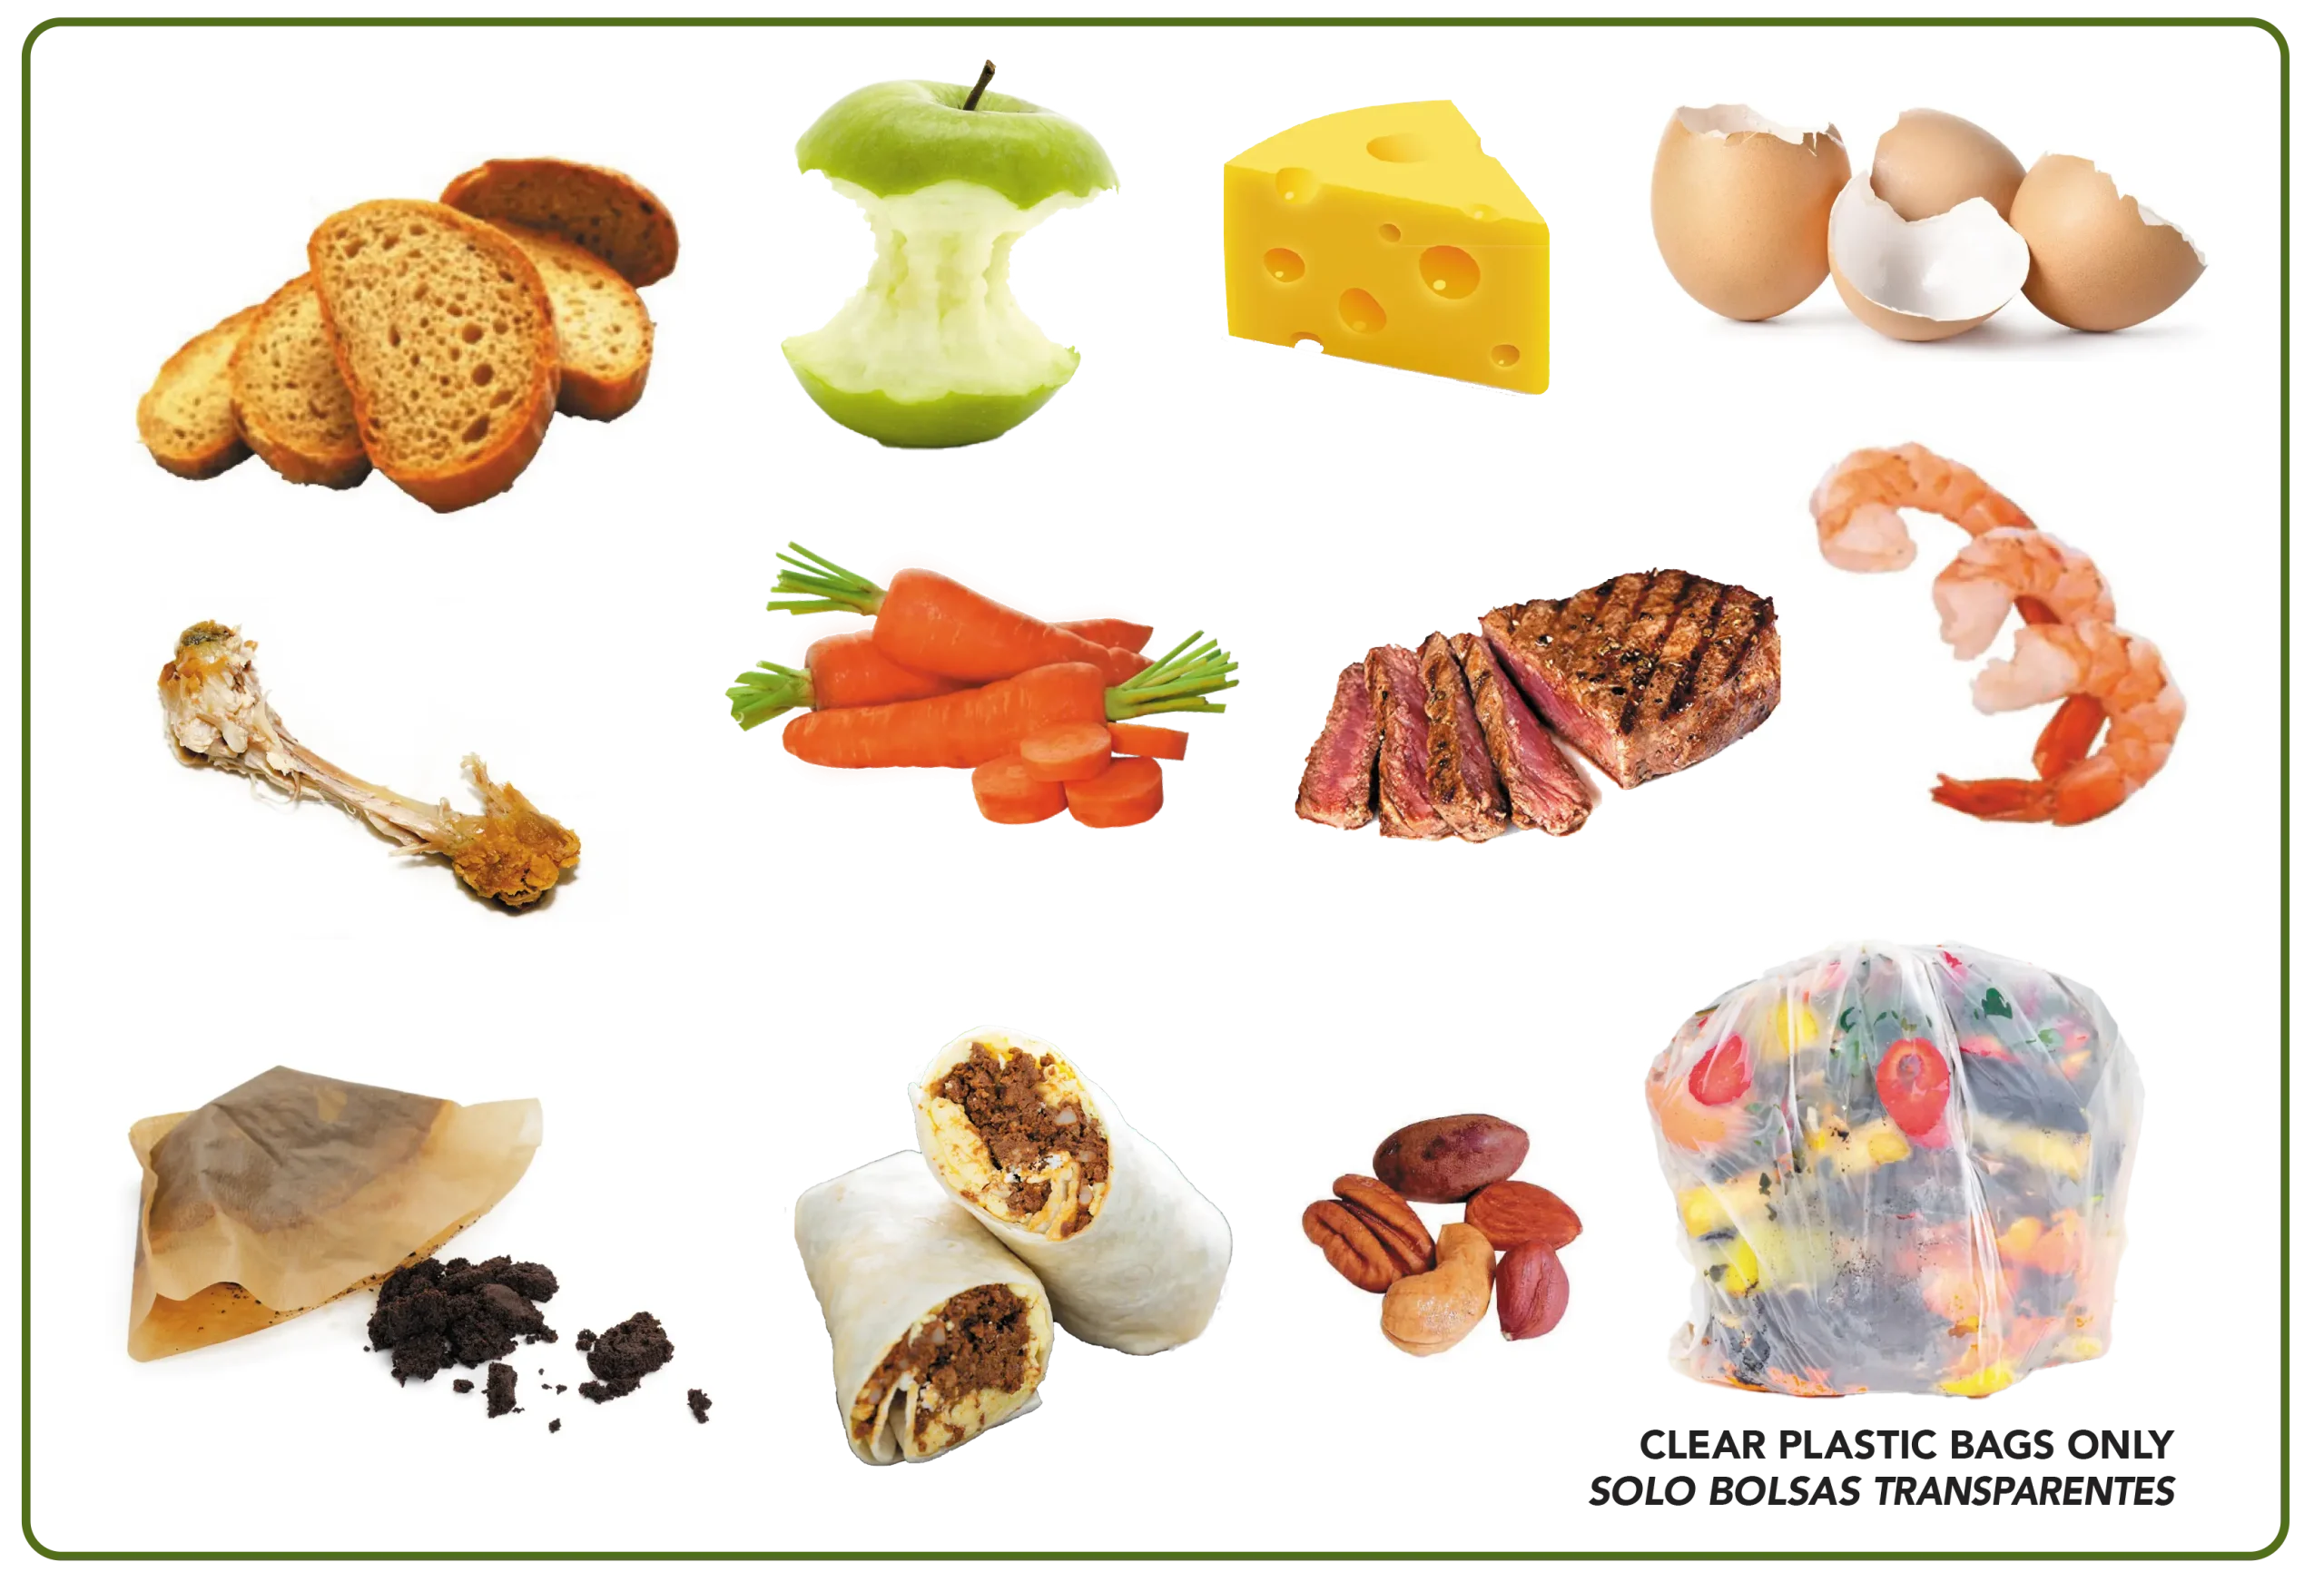 Images of food scraps allowed in the Food 2 Energy cart